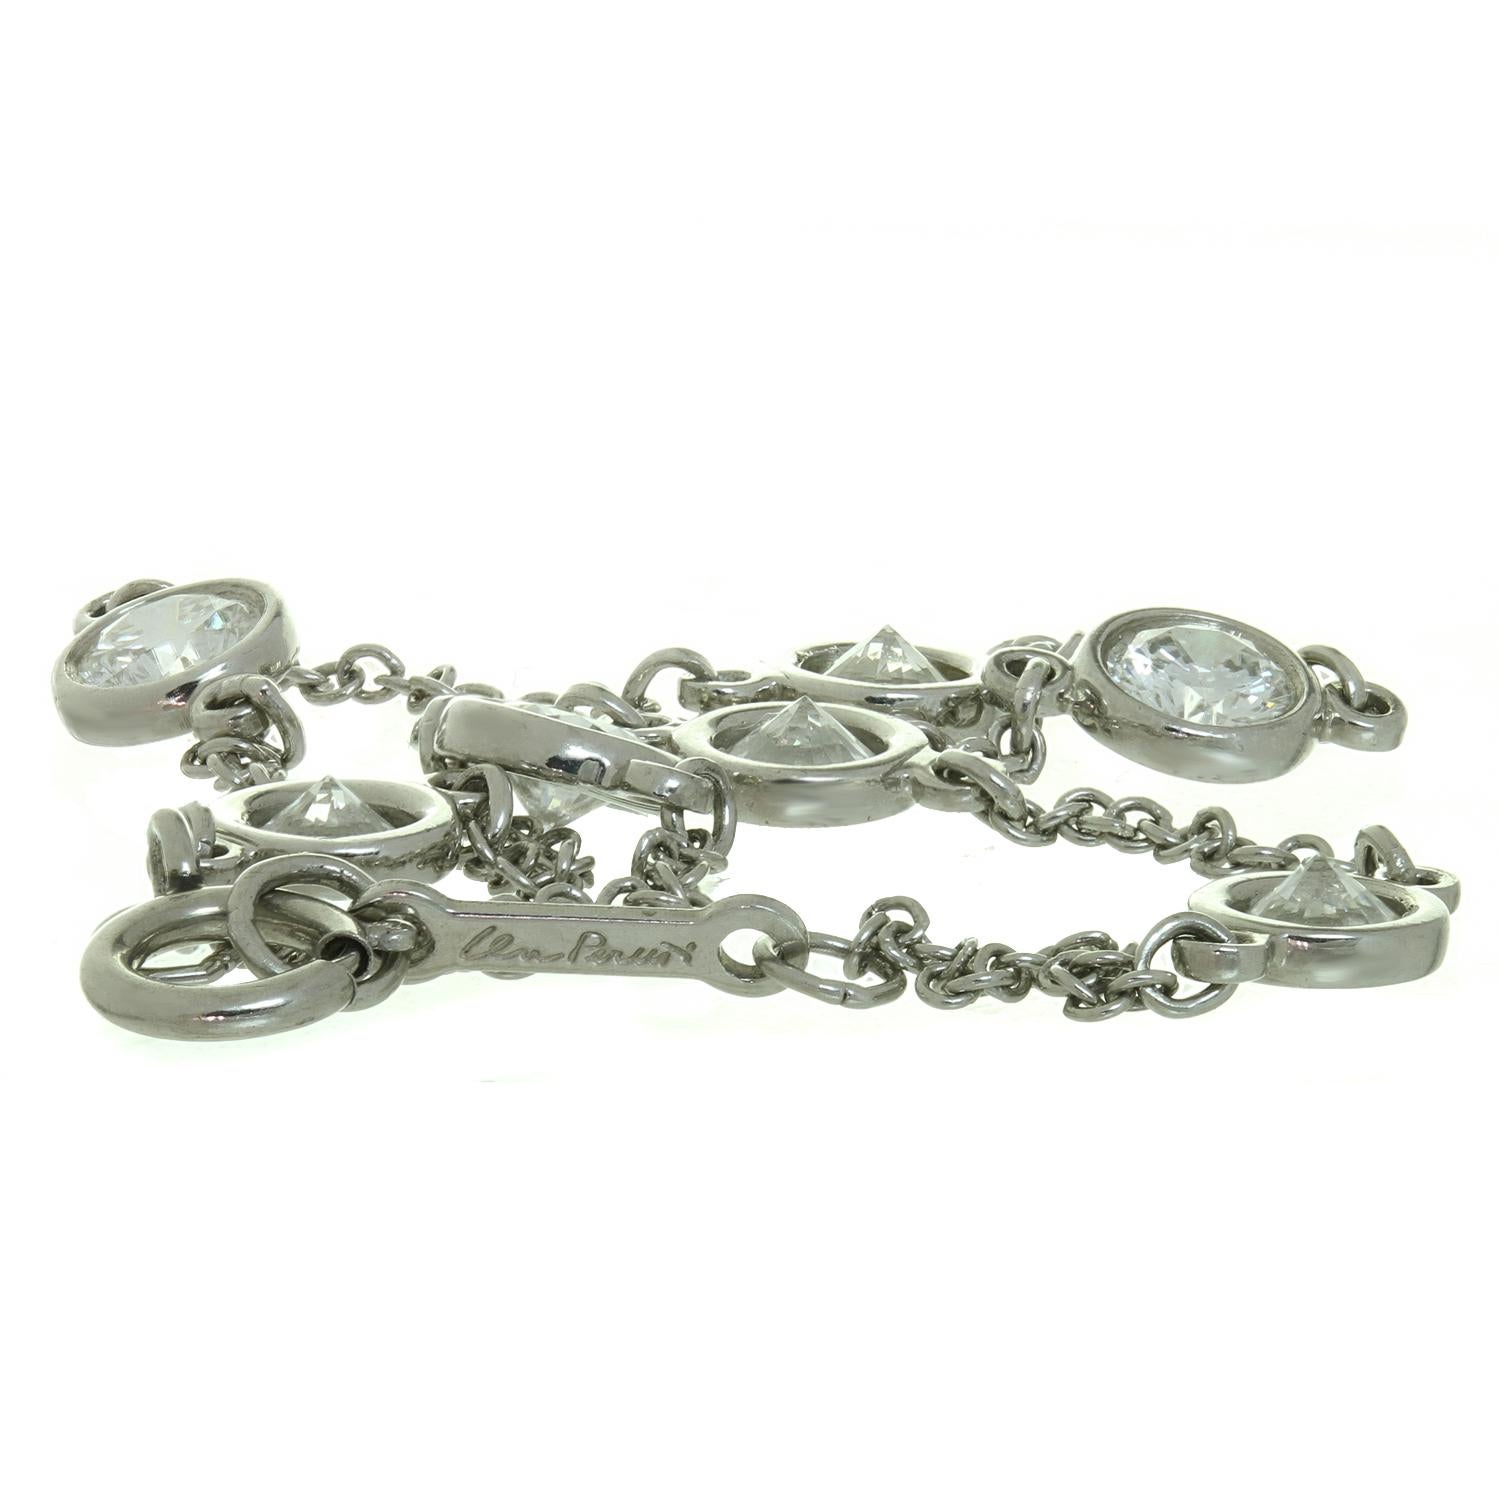 This exquisite Tiffany & Co. Diamond by the Yard bracelet is crafted in 950 platinum and features 7 diamonds in 4.5mm round bezel settings. The round brilliant E-F-G VVS1-VVS2 diamonds weigh an estimated 1.26 carats. Made in United States circa